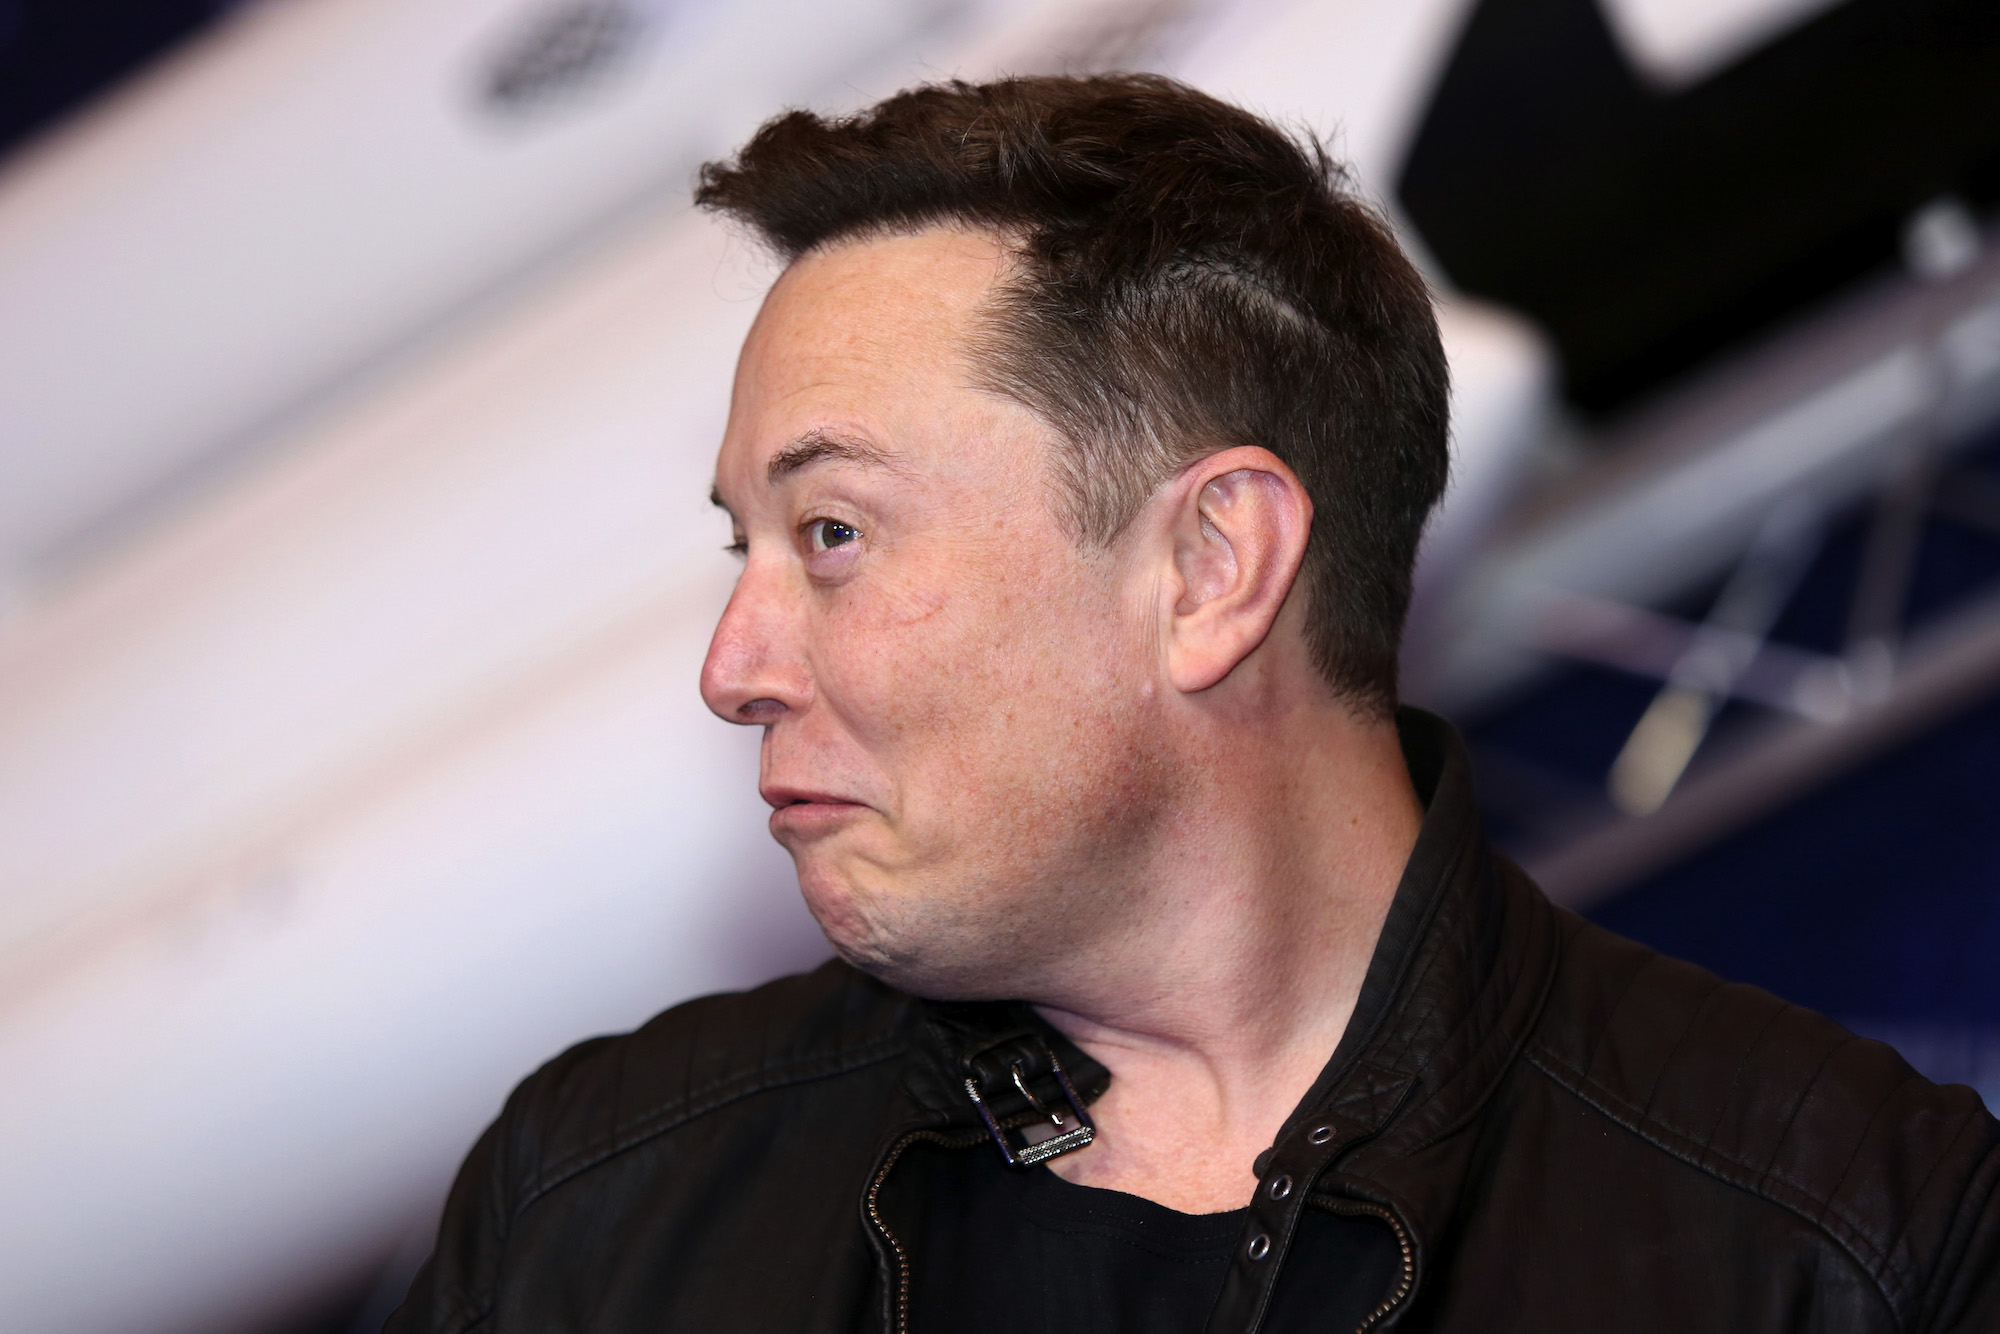 Tesla CEO Elon Musk arrives at the Axel Springer Award ceremony in Berlin, Germany, on Tuesday, December 1, 2020